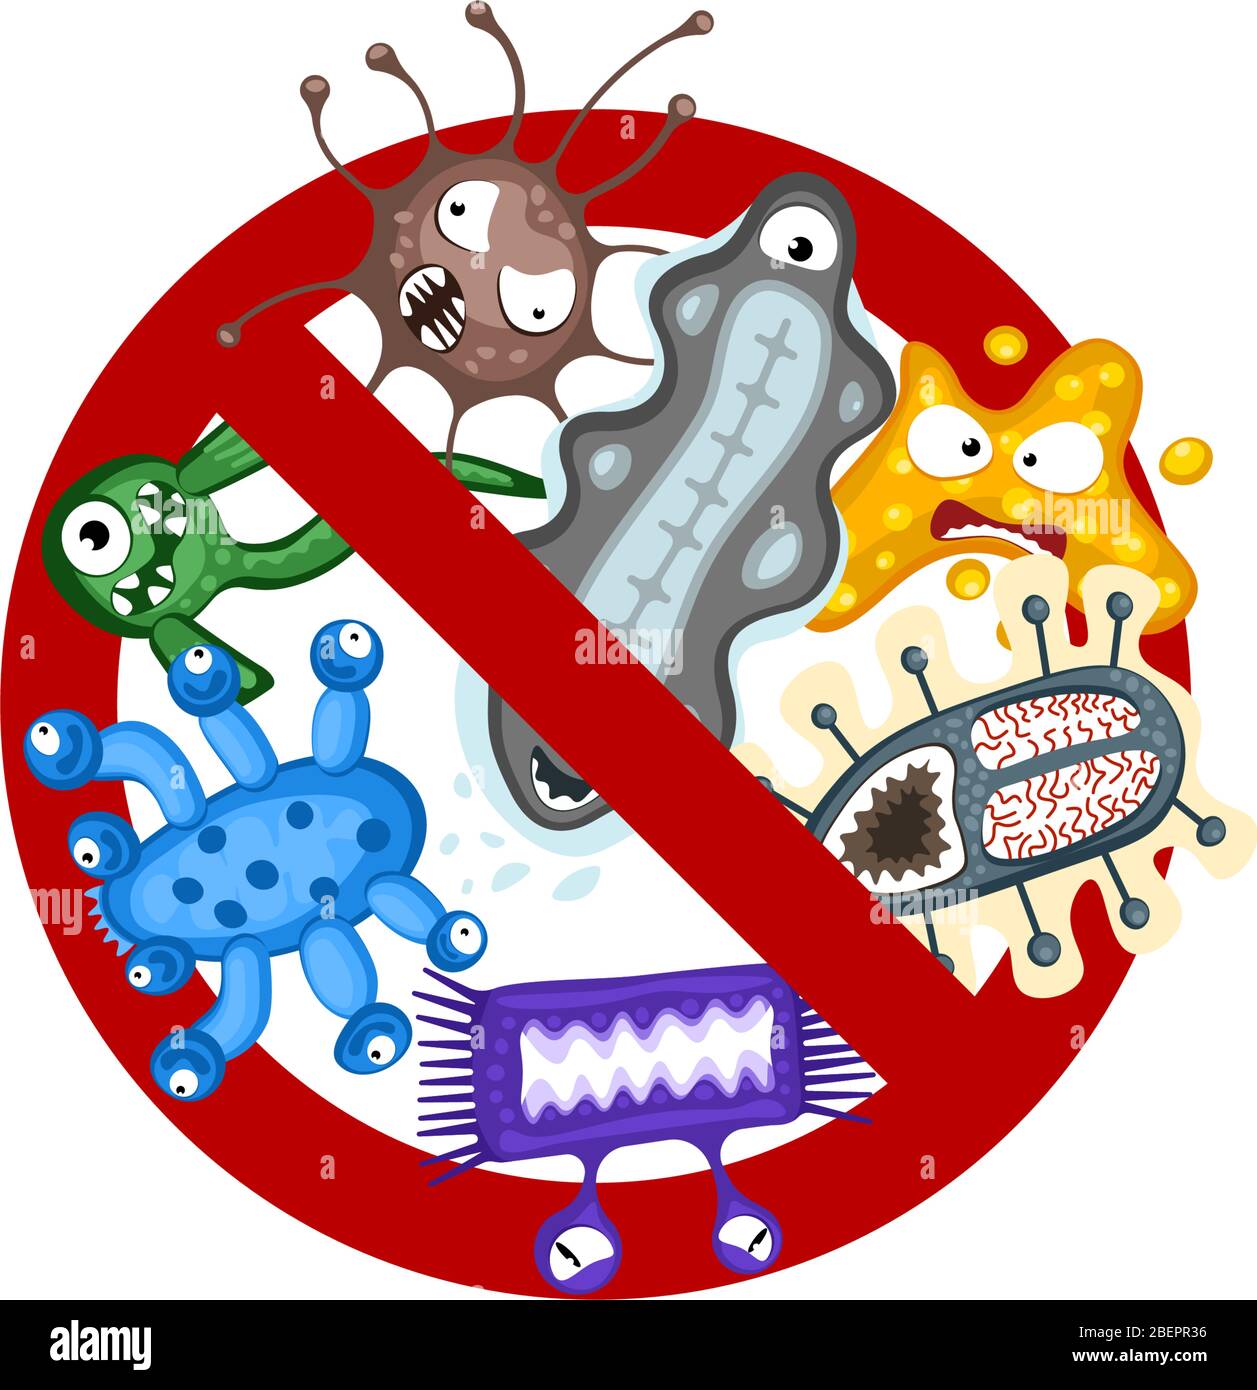 Stop spread virus sign. Cartoon germ characters isolated vector eps illustration on white background. Cute fly bacteria infection character. Microbe viruses and diseases protection concept Stock Vector